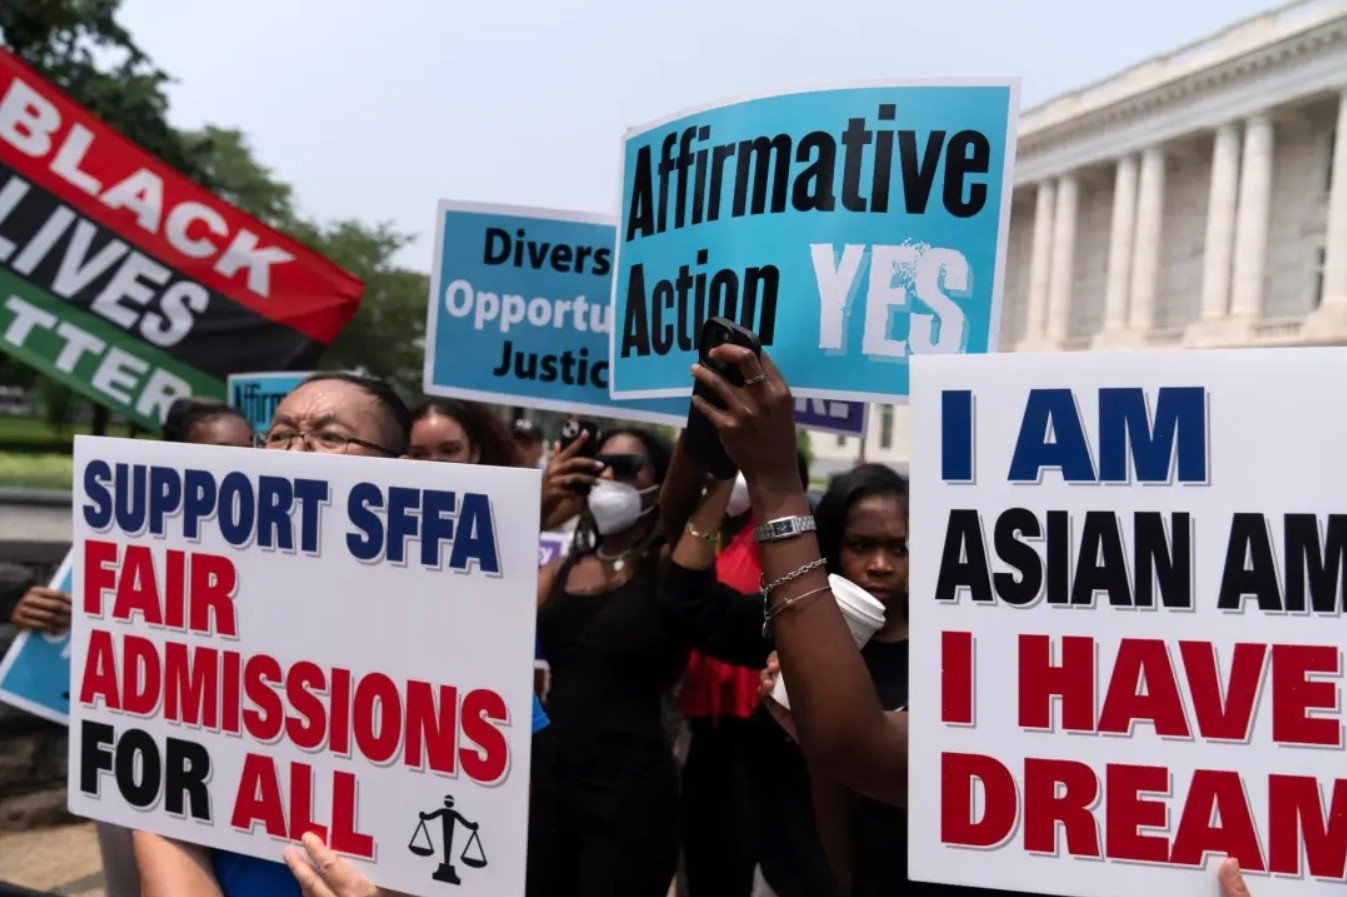 activists hold signs in support of fair admissions for all and affirmative action